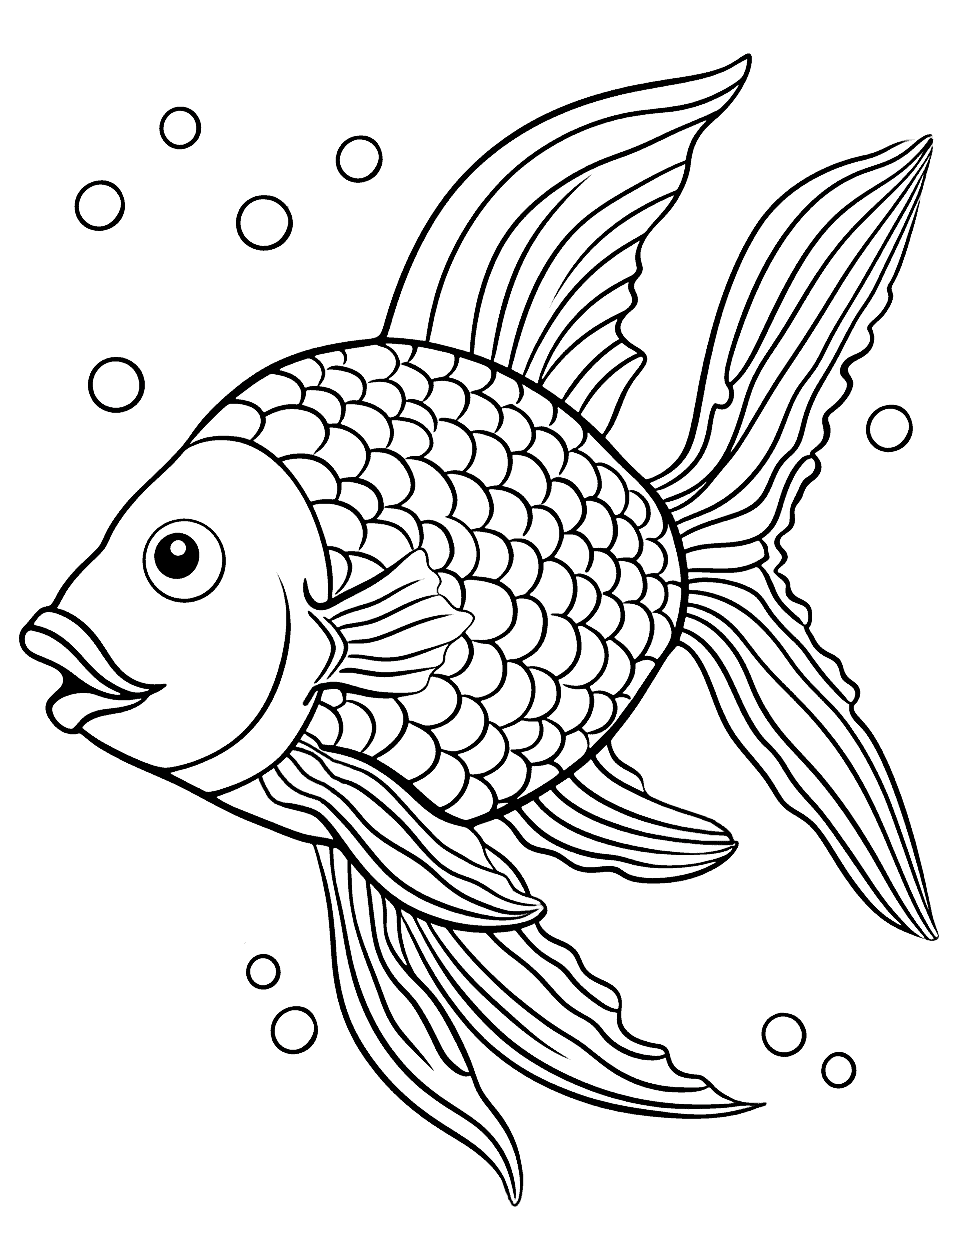 Deep Sea Fish Mysteries Coloring Page - Bioluminescent fish from the deep sea, showing its glowing patterns.